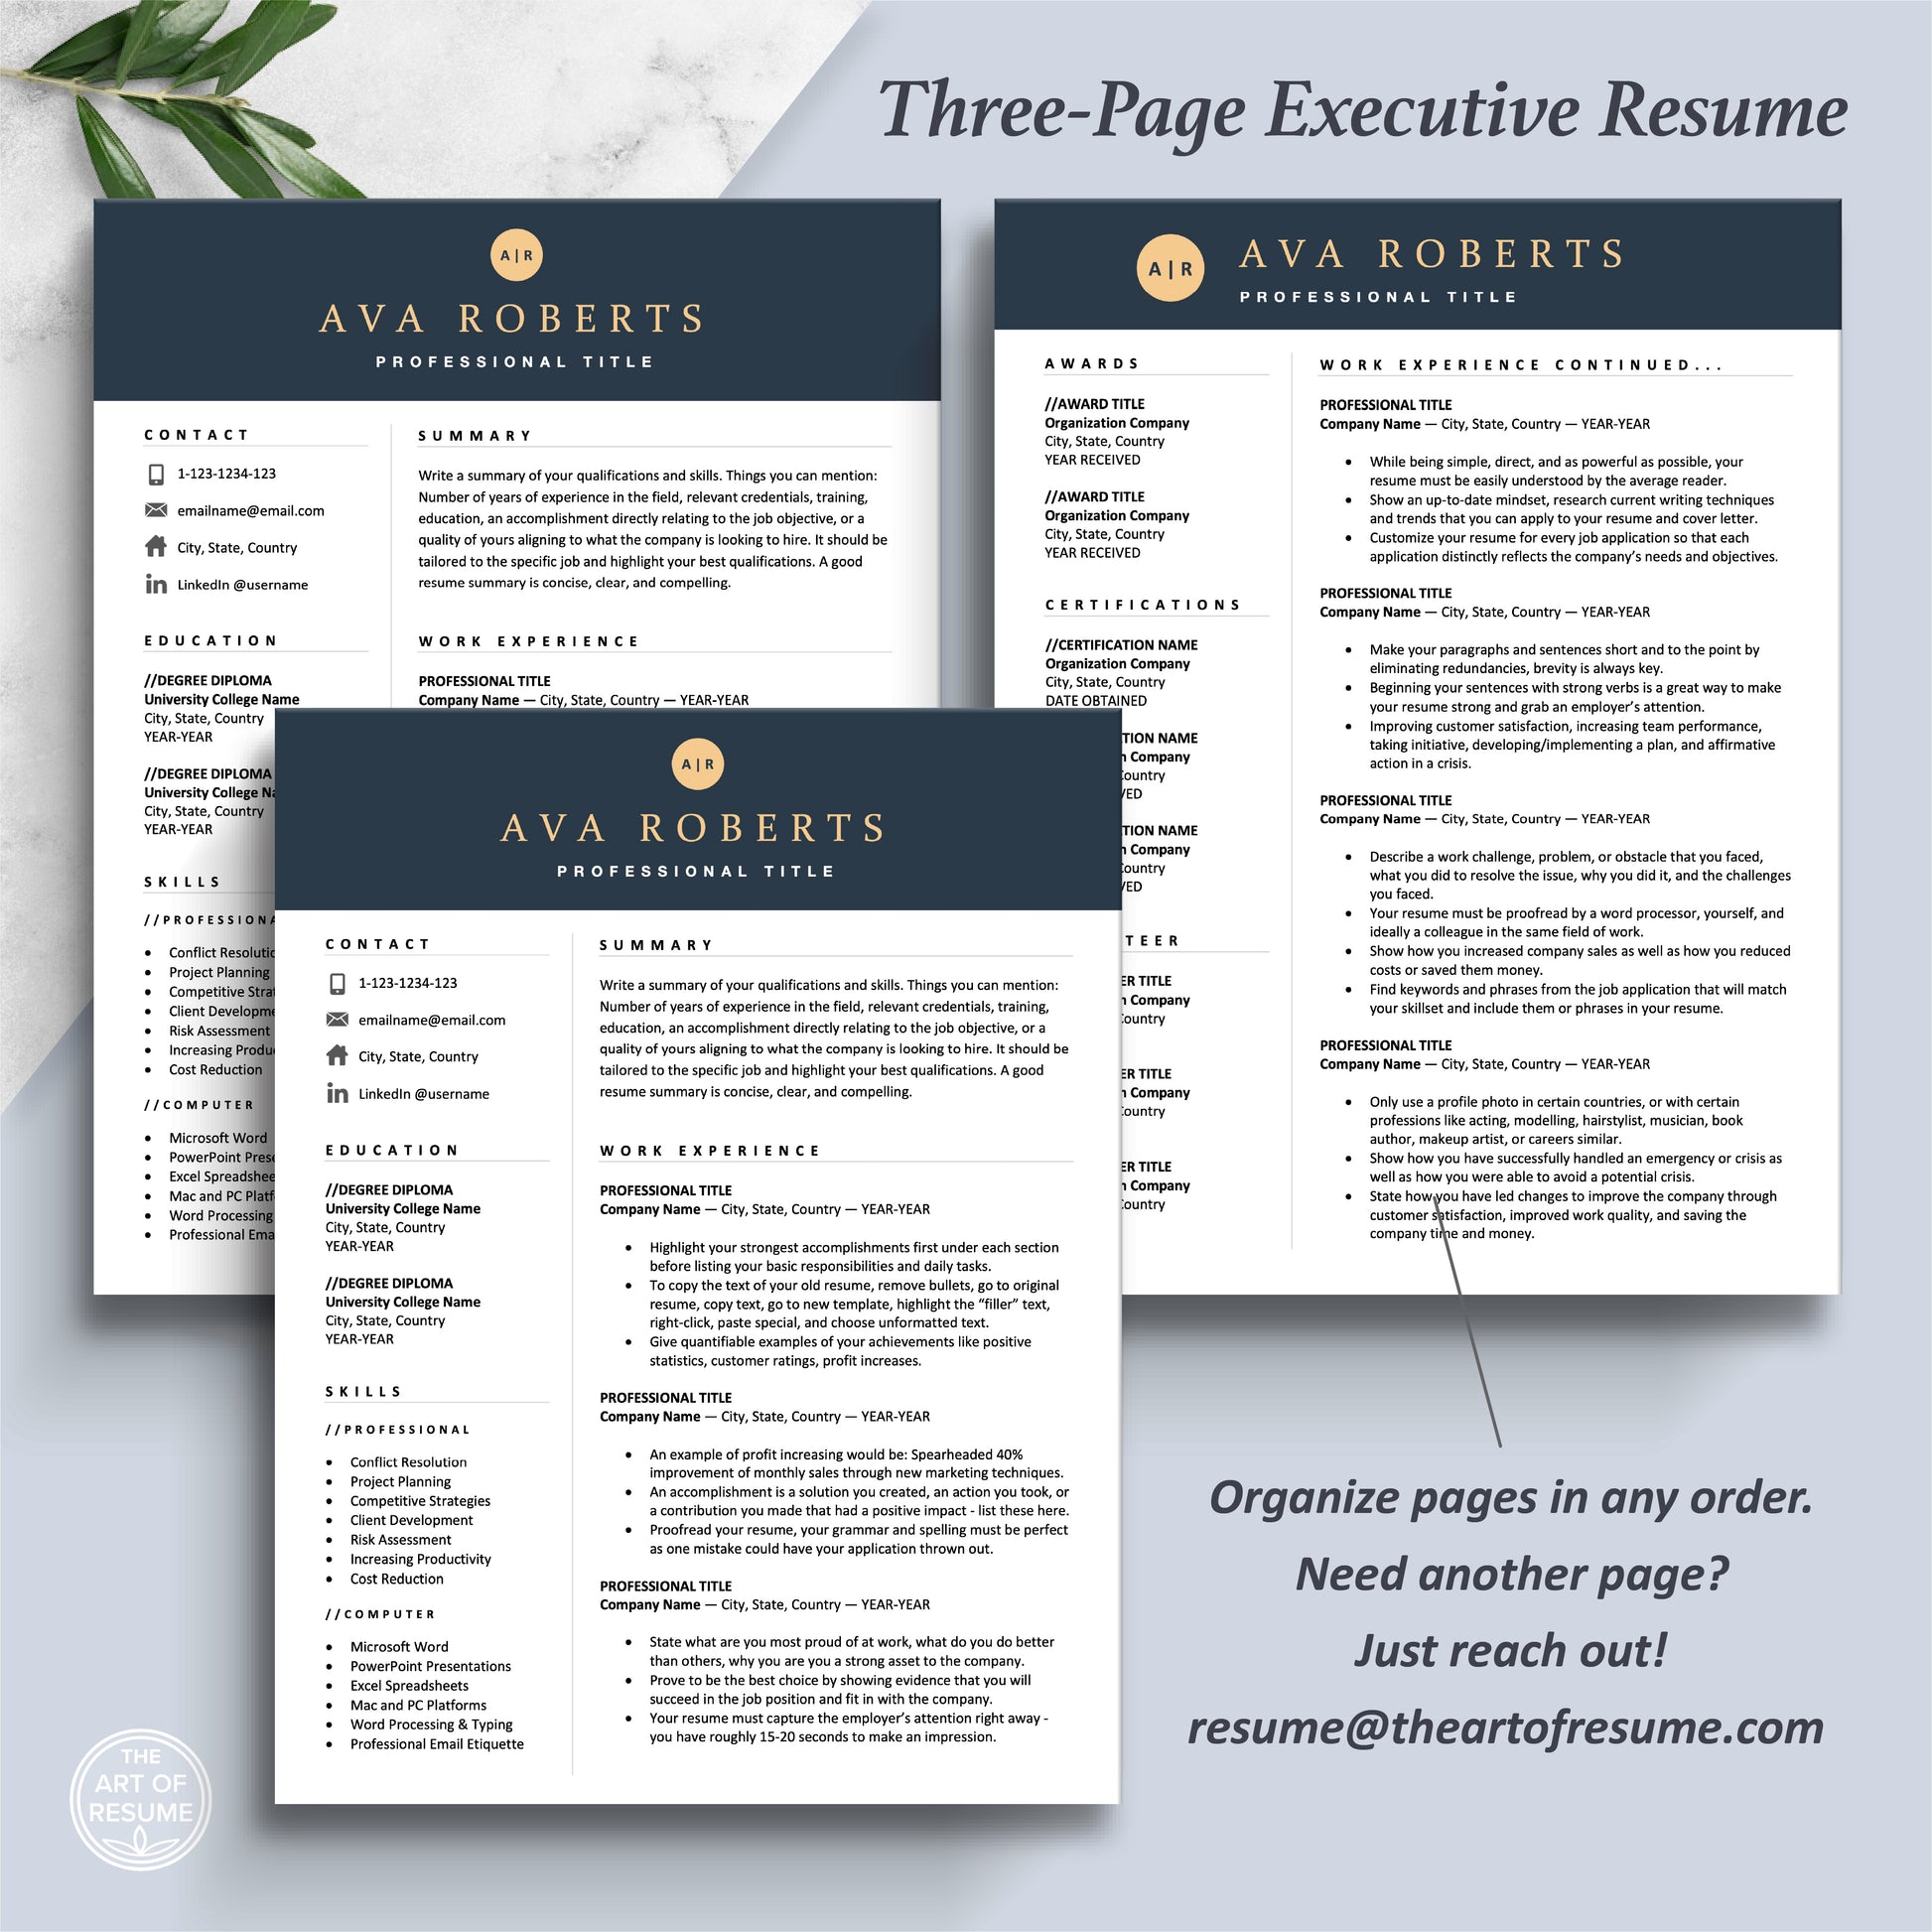 The Art of Resume Templates | Three-Page Executive CEO C-Suite Level Navy Blue Resume CV Template Format | Curriculum Vitae